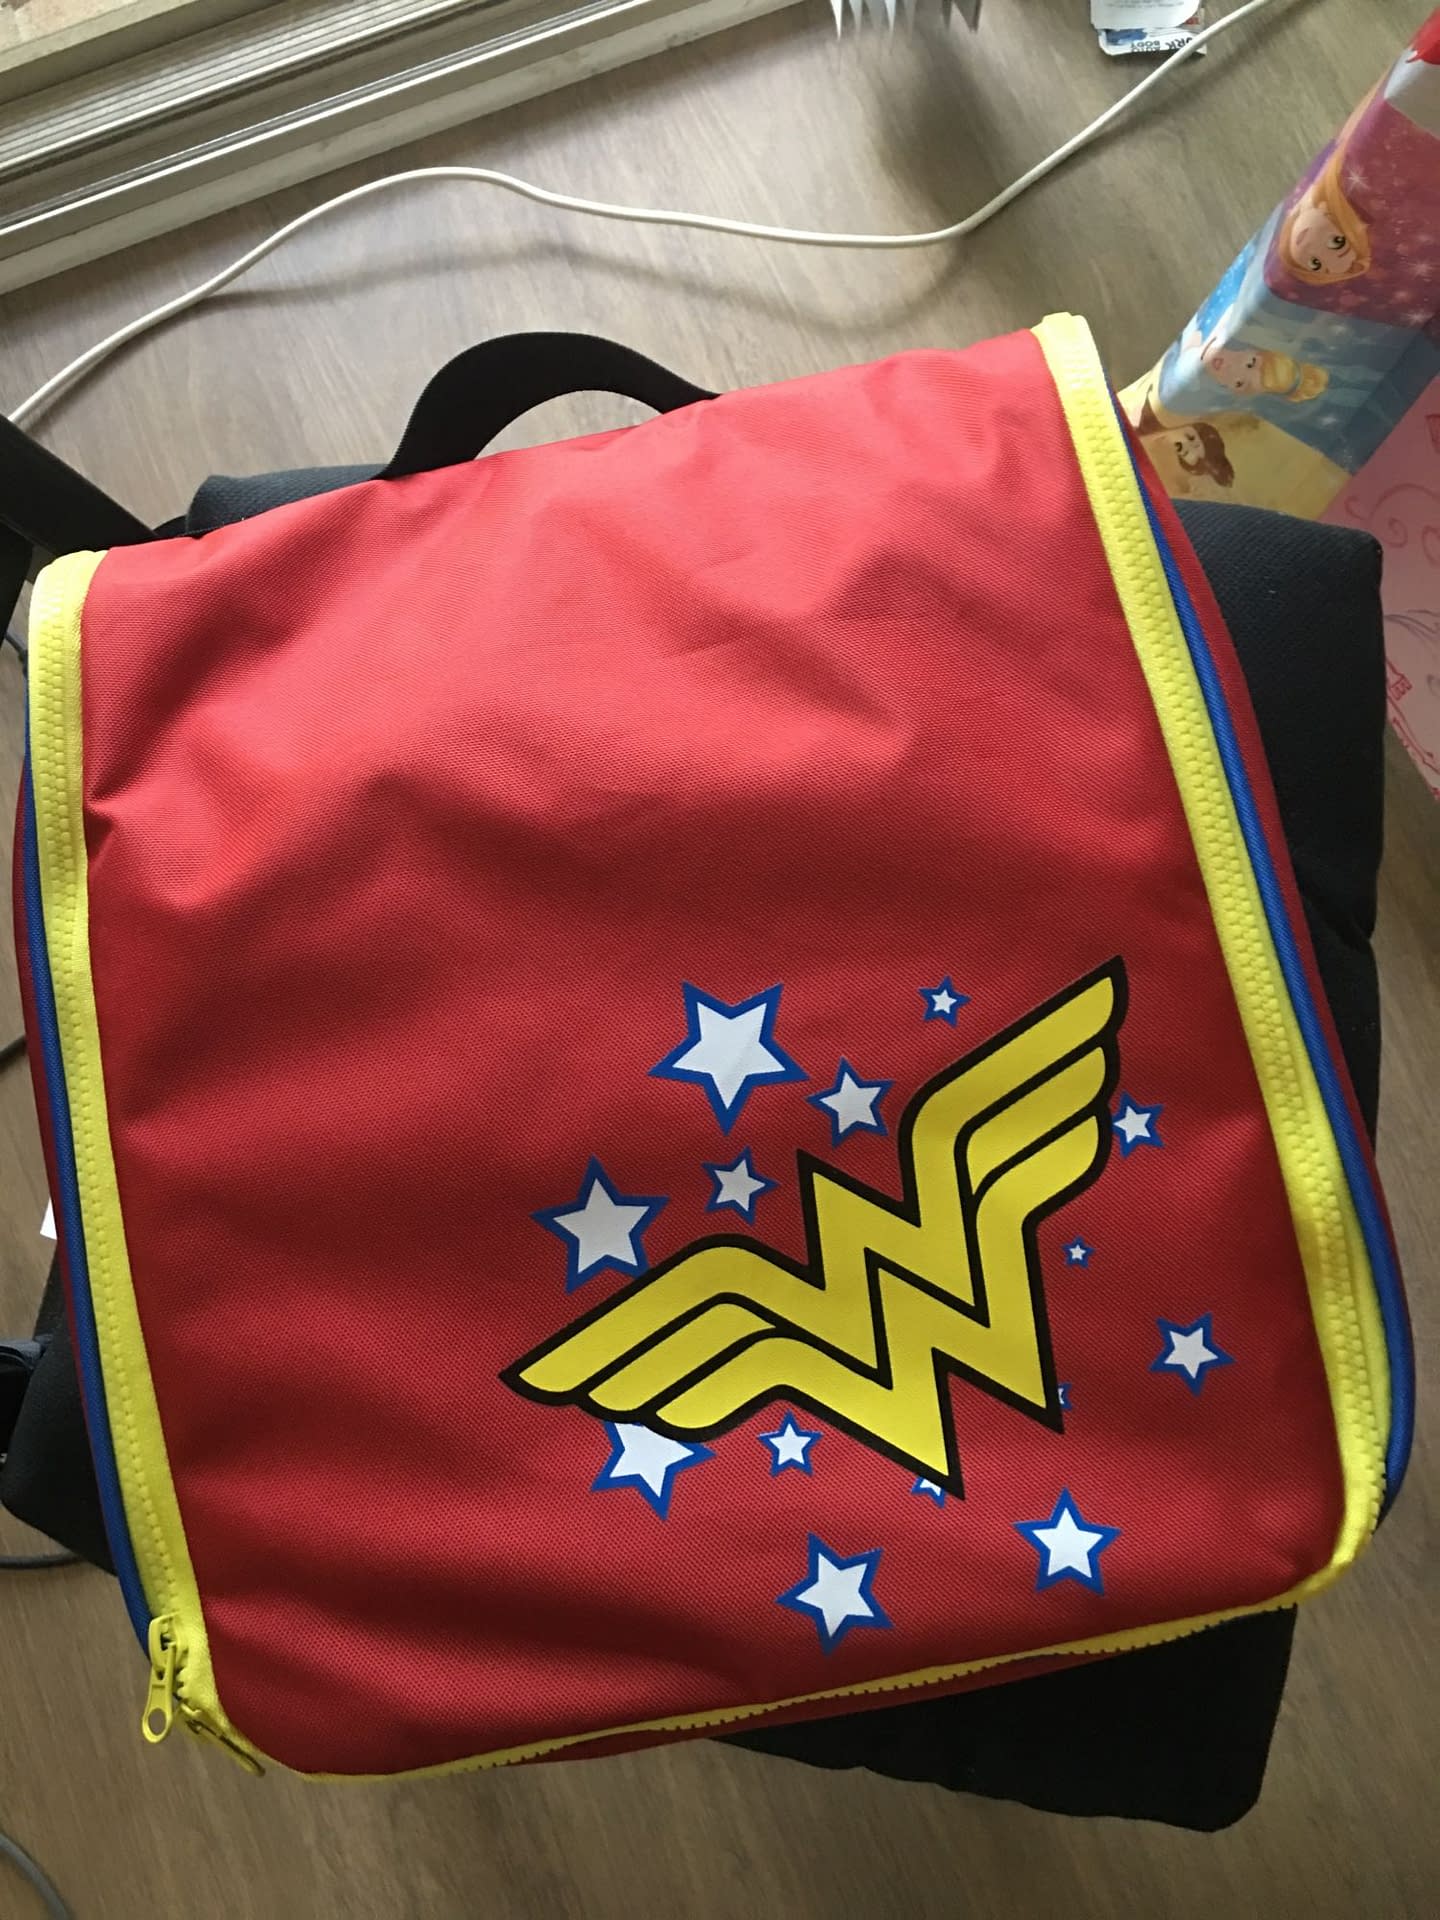 Gifts for Geeky Moms: Wonder Woman Spa Gift Set from ThinkGeek